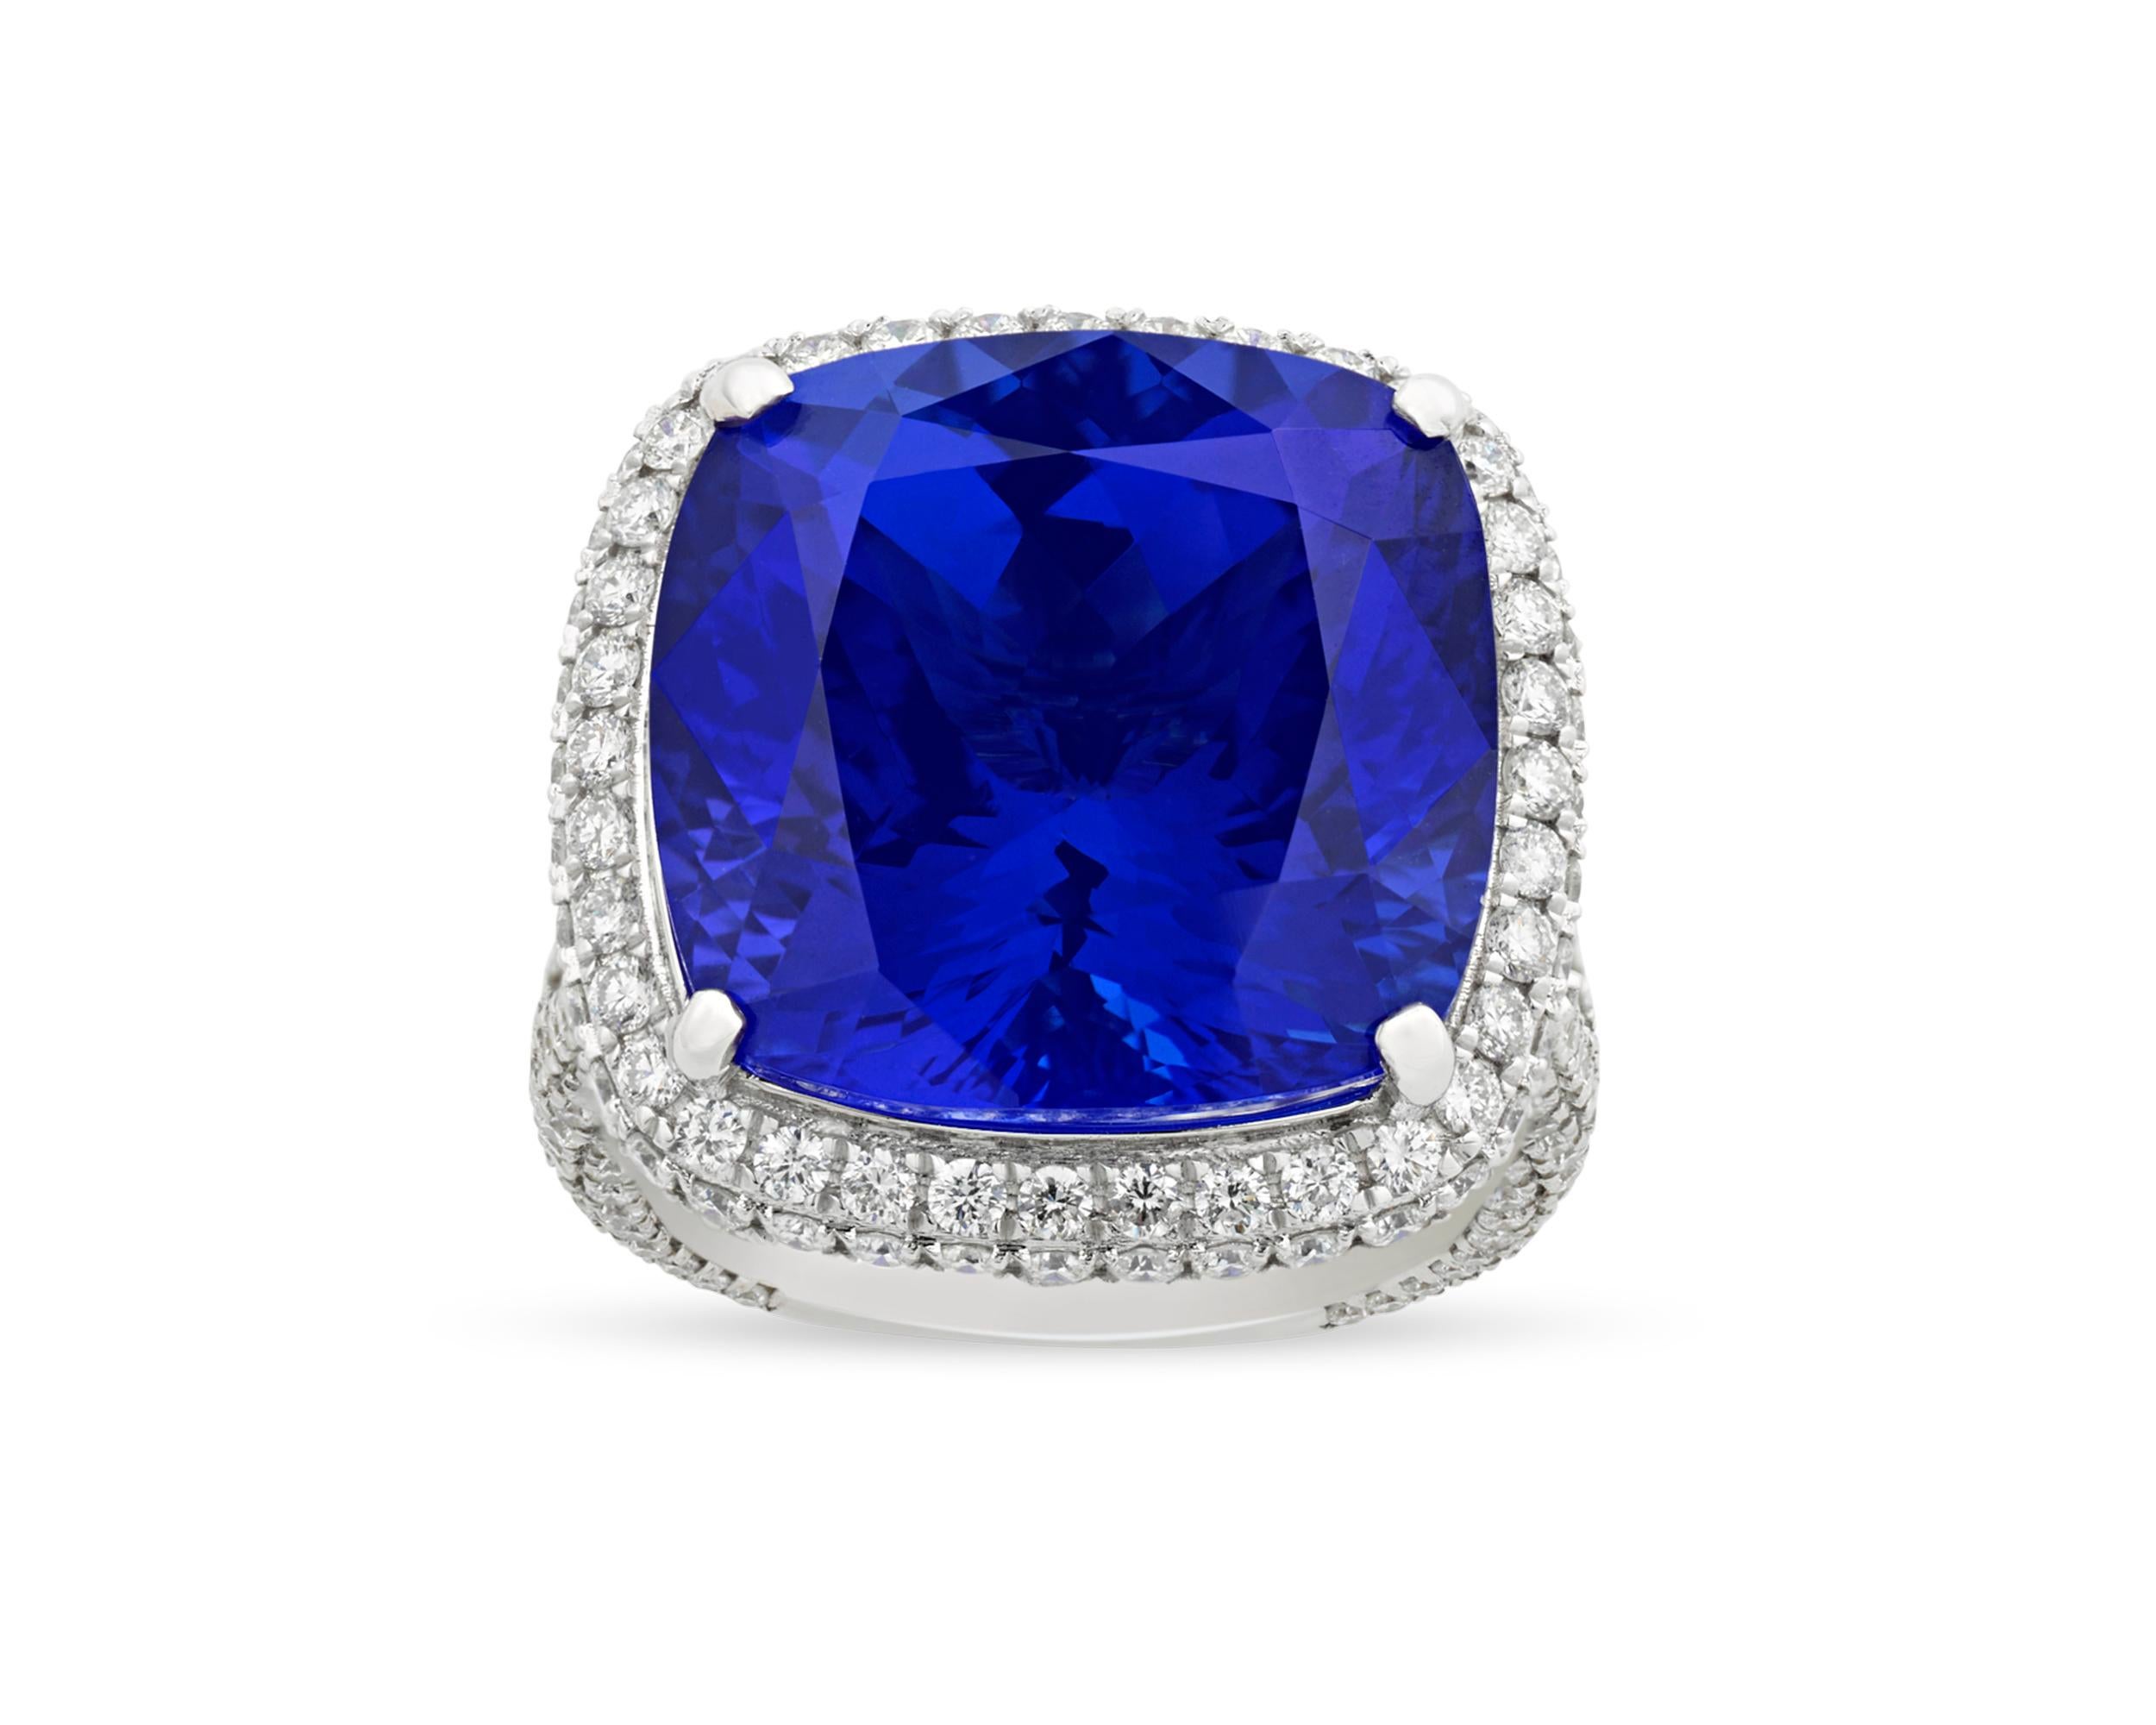 The monumental 22.43-carat cushion-cut tanzanite in this convertible ring displays the incredible deep violetish-blue hue for which tanzanites are so desired. The rare gemstone has been certified by the American Gemological Institute (AGL) to be